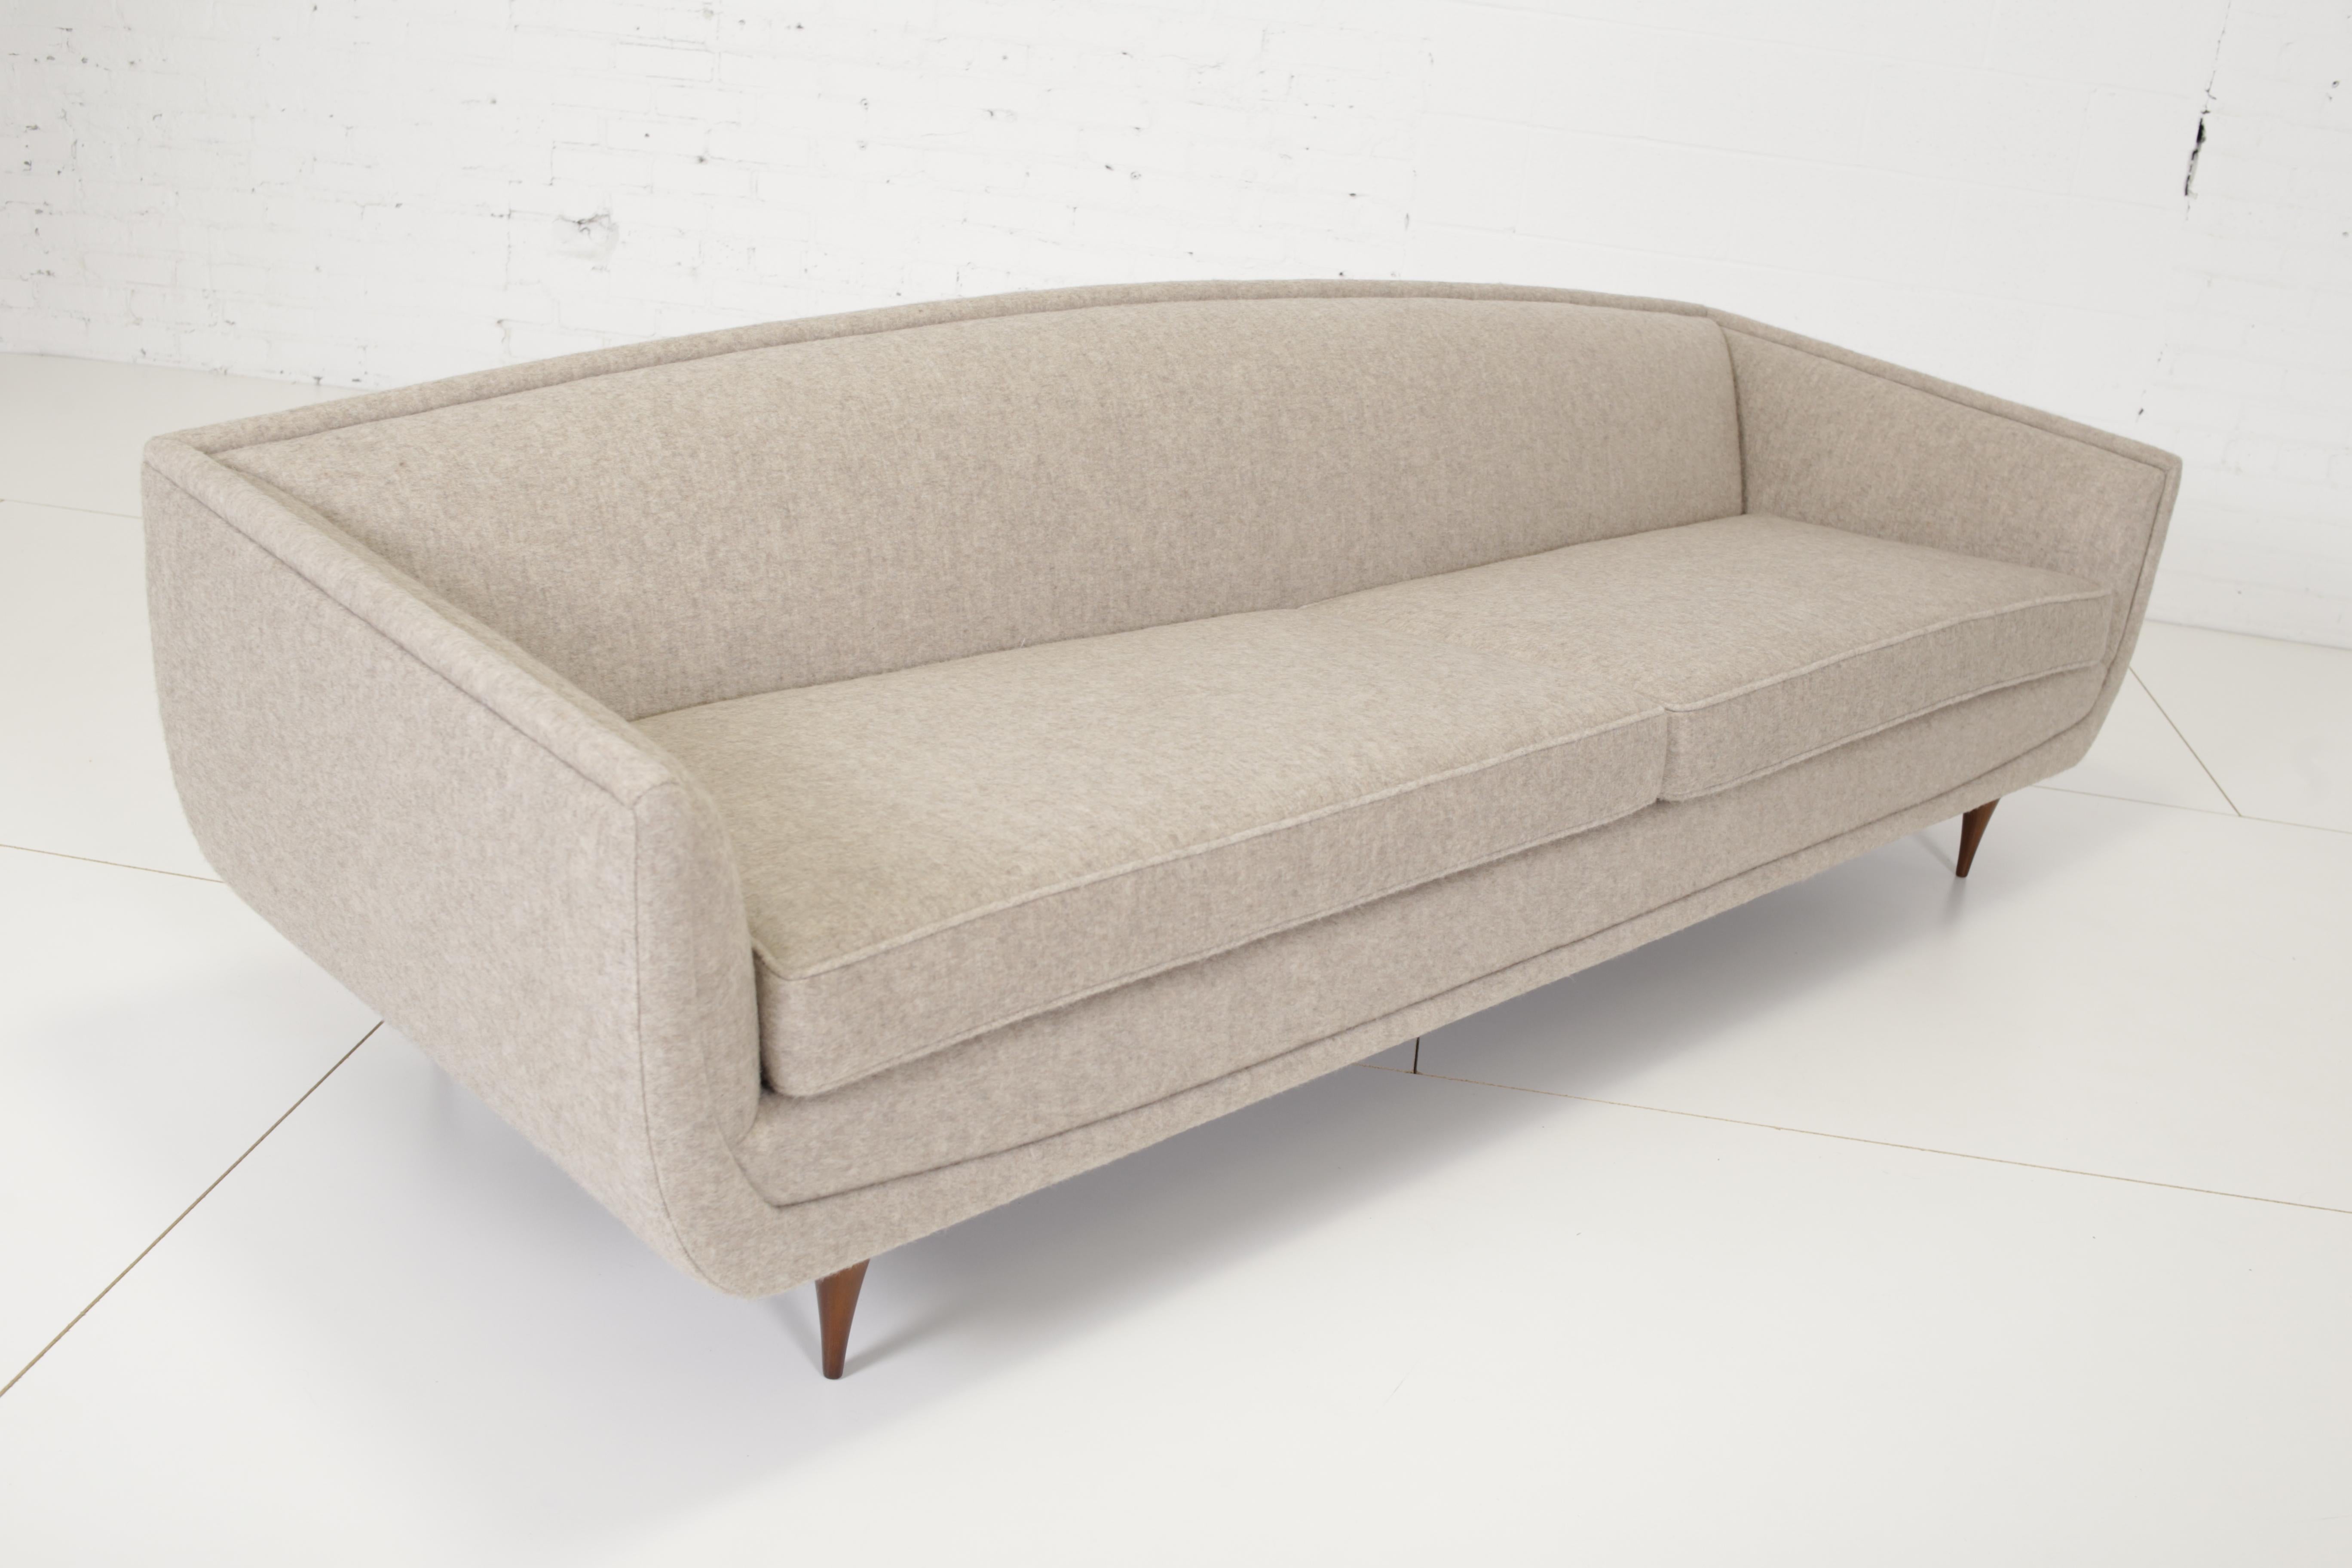 Rare modernist sofa by Karpen of CA Furniture. Fully restored and reupholstered in felted wool/alpaca blend upholstery.